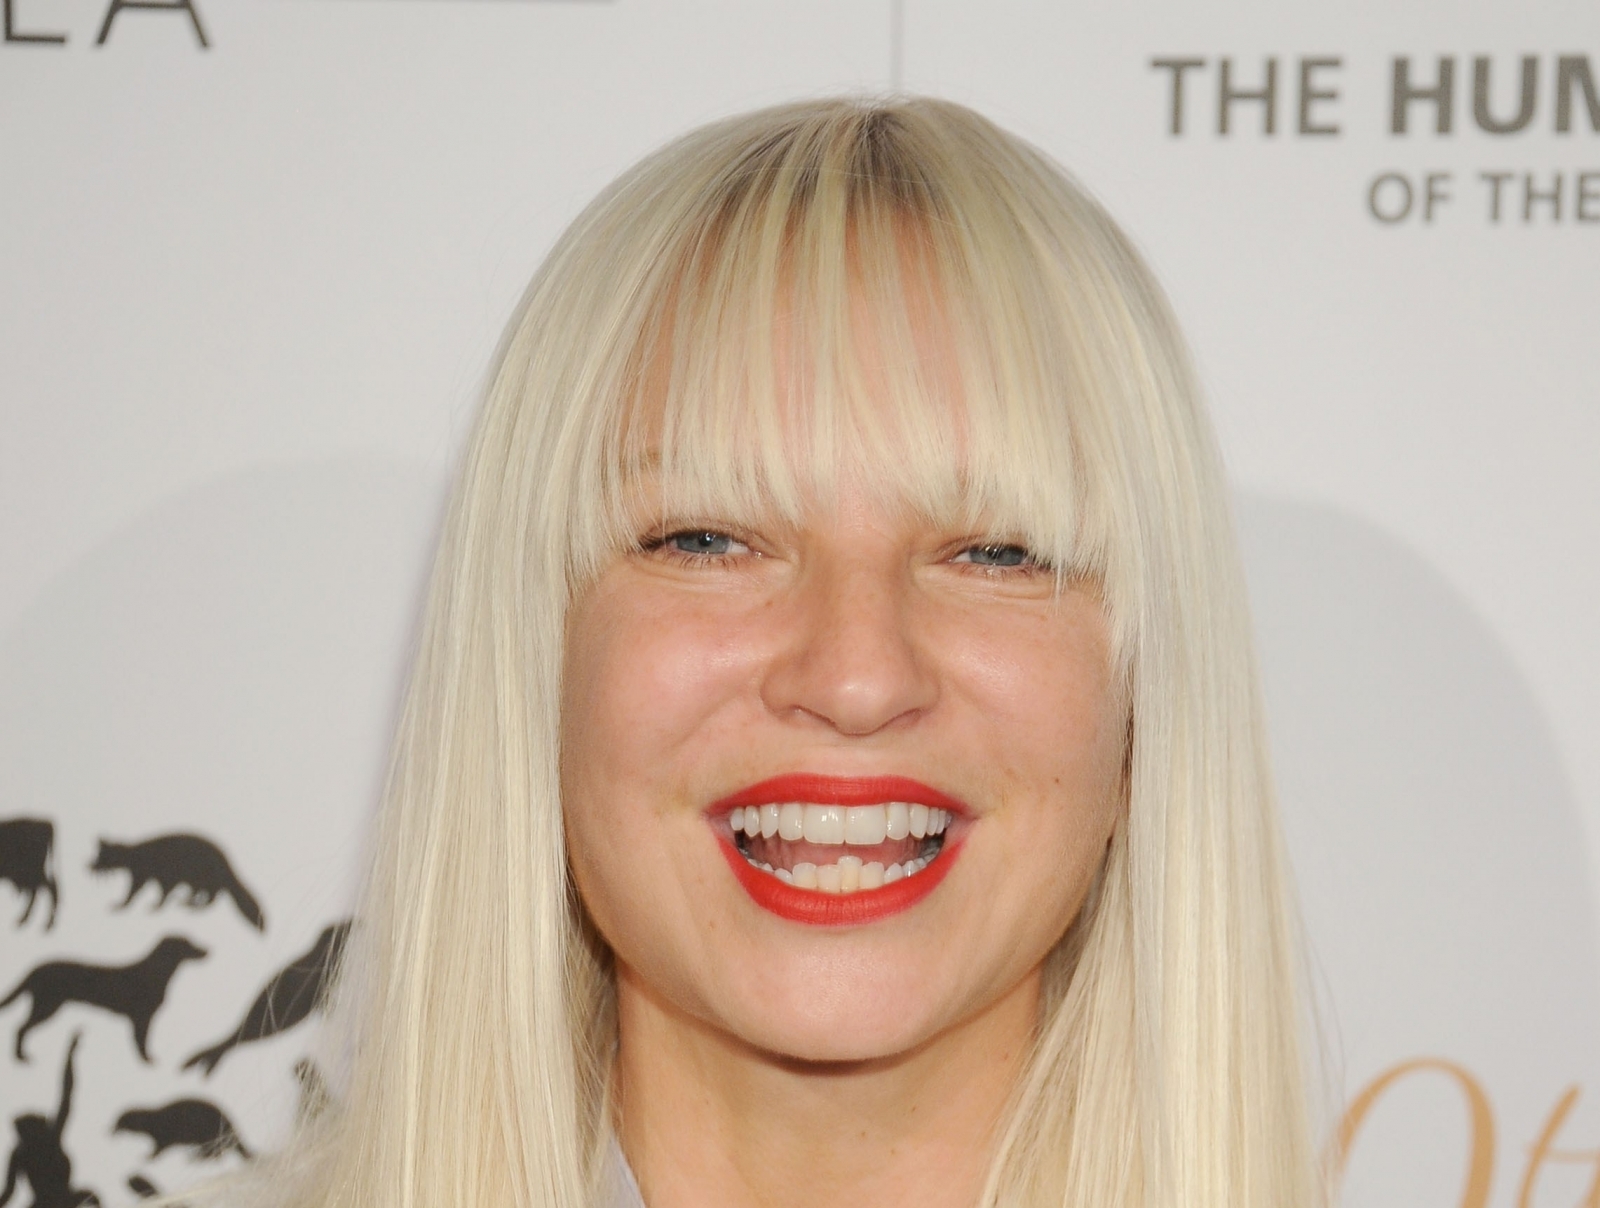 Pop star Sia exposes bit too much skin as she suffers wardrobe